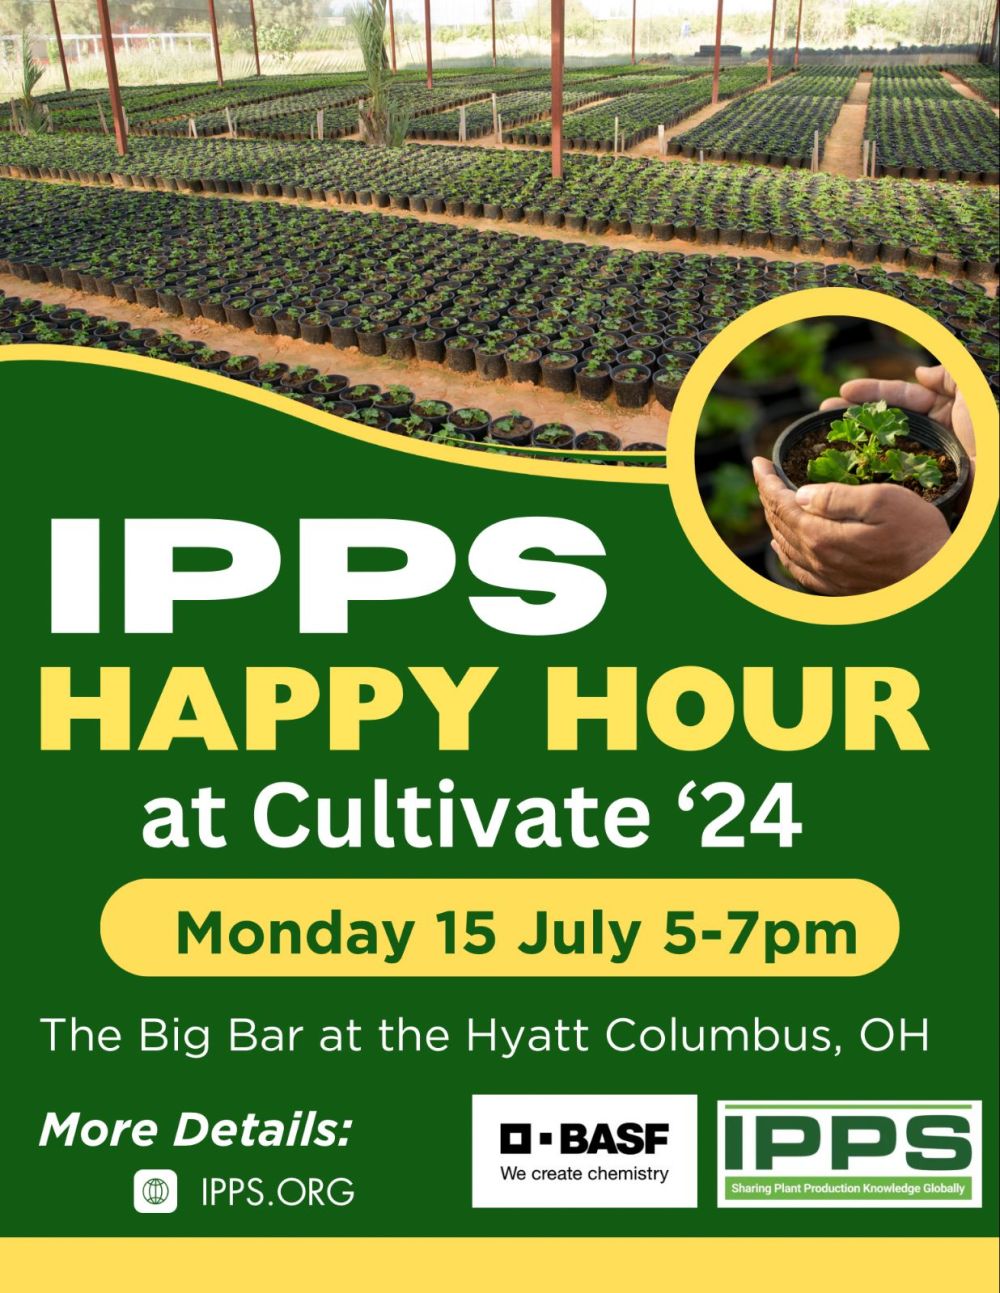 IPPS Happy Hour at Cultivate in Ohio